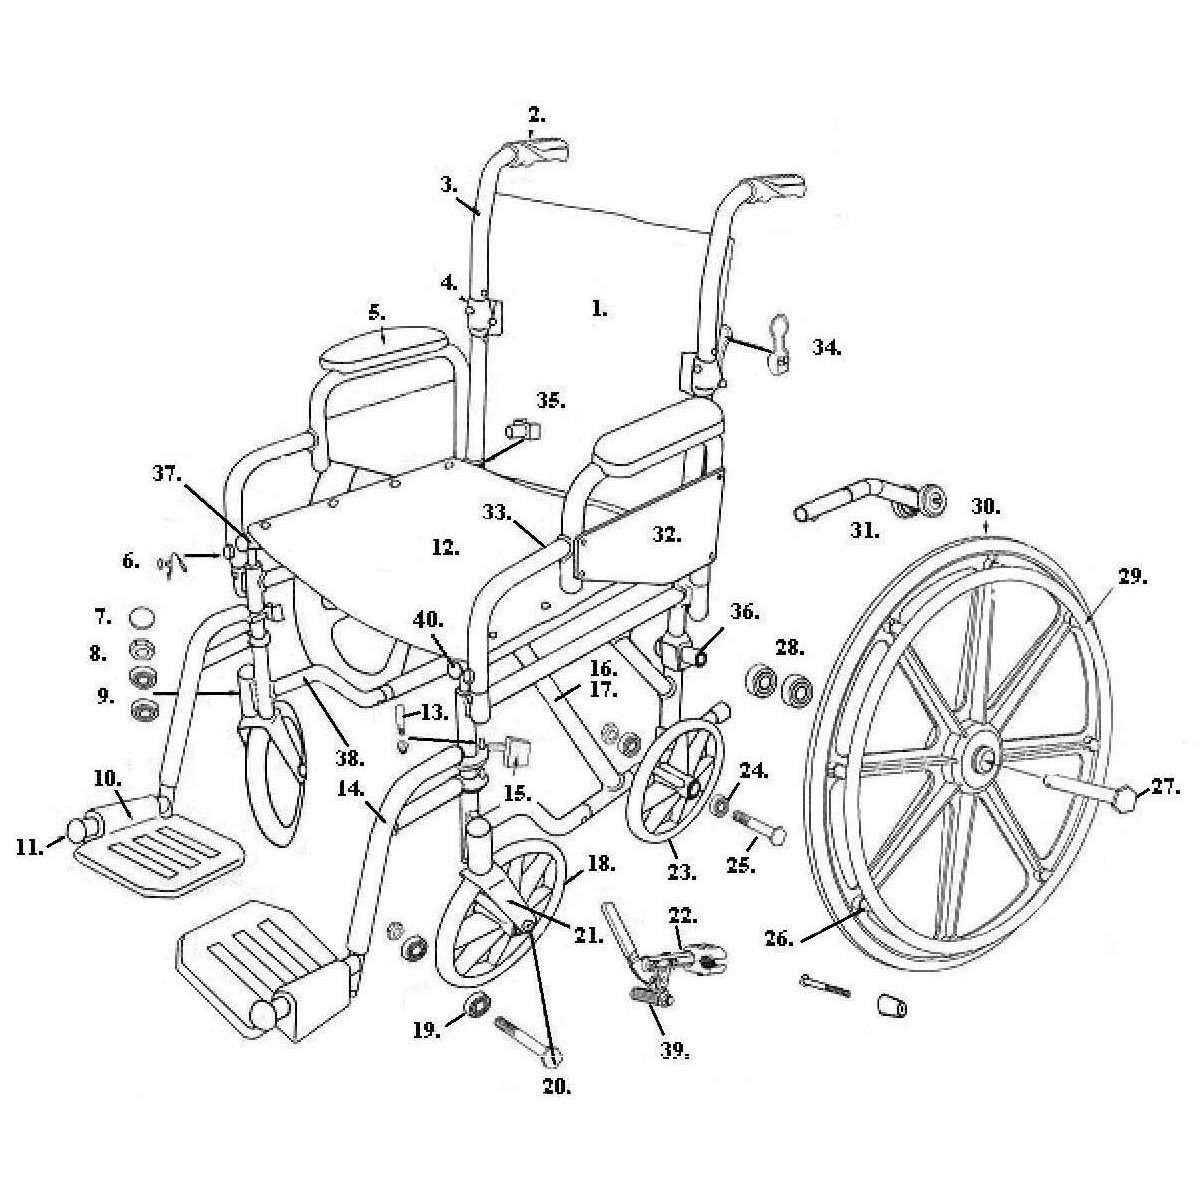 STDS2A1600 Replacement quick change rear wheel for the Drive Poly-Fly transport chair